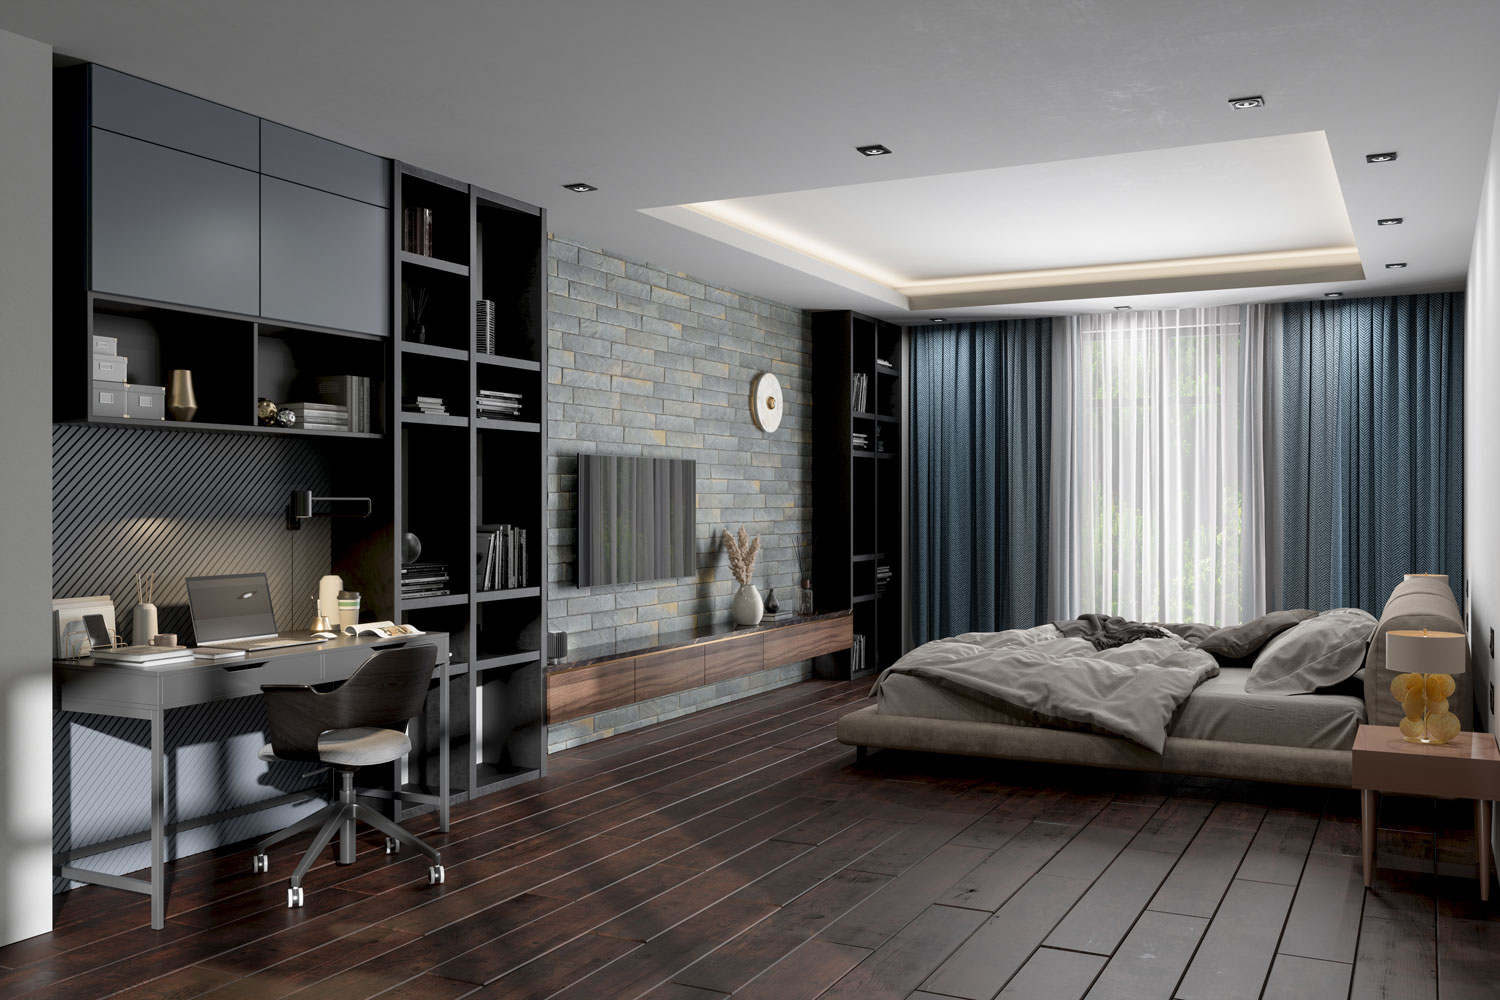 Huge open space bedroom with dark laminated flooring with matching dark cabinets